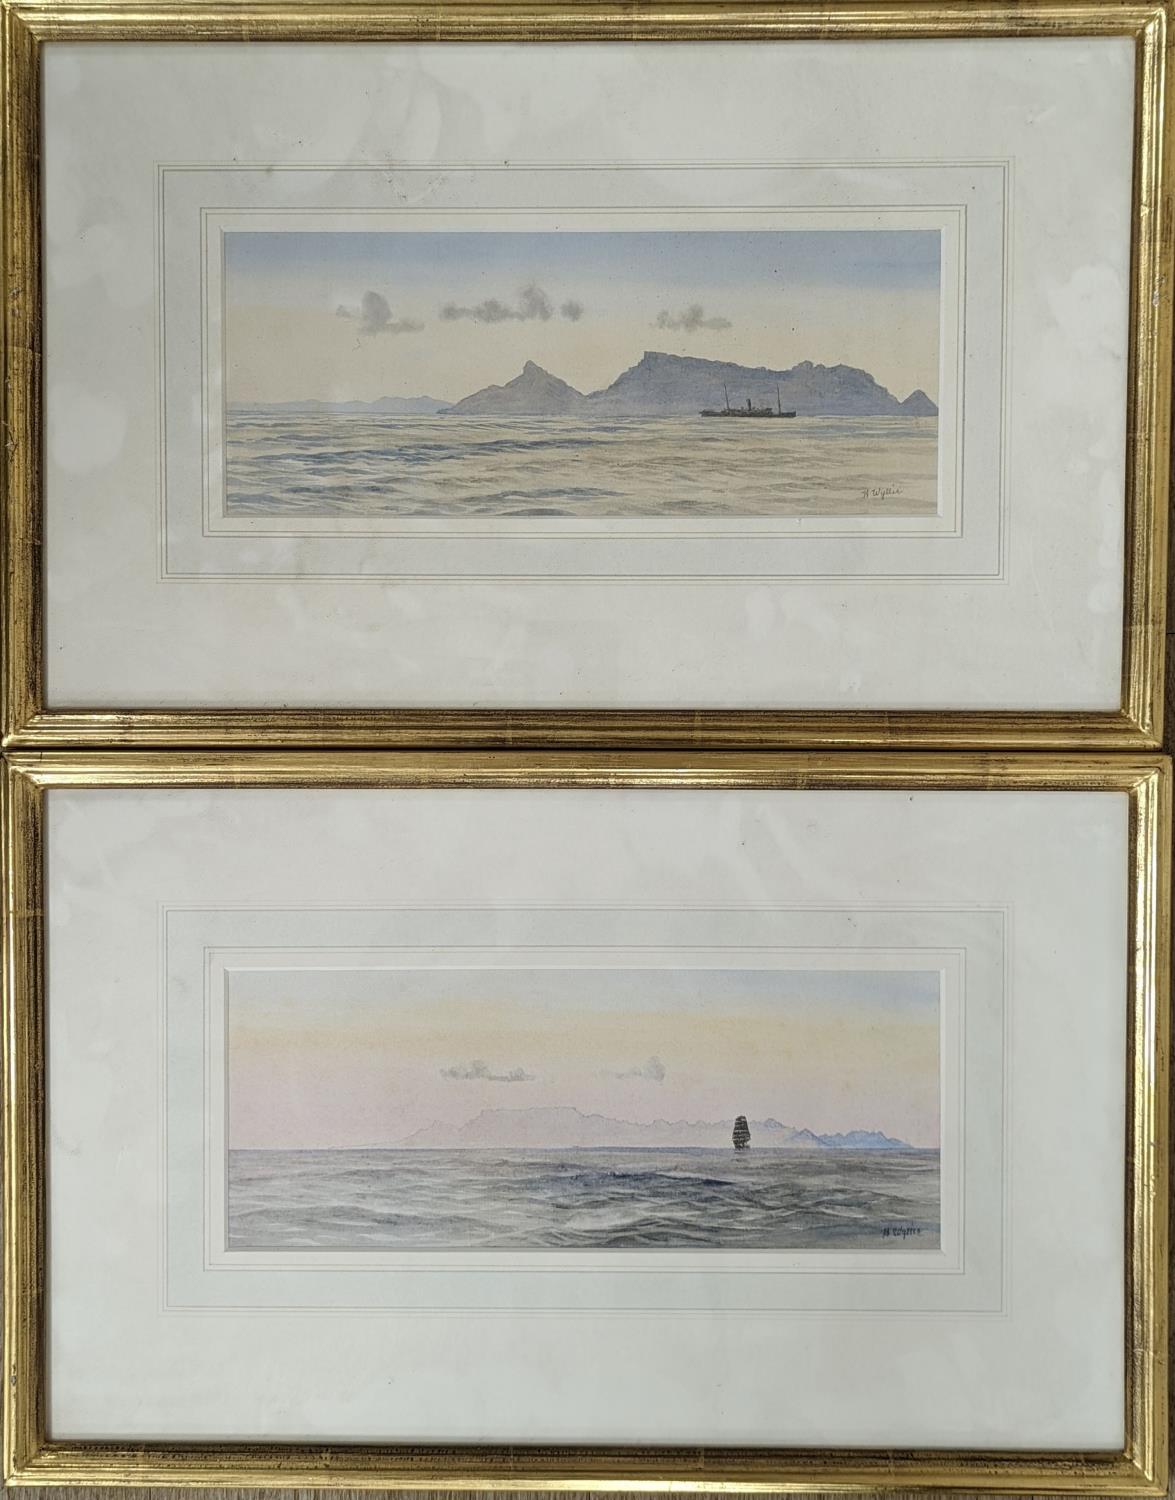 Harold Wyllie (1880-1973), pencil and watercolour, Views of Cape Town from the sea, signed, 11 x